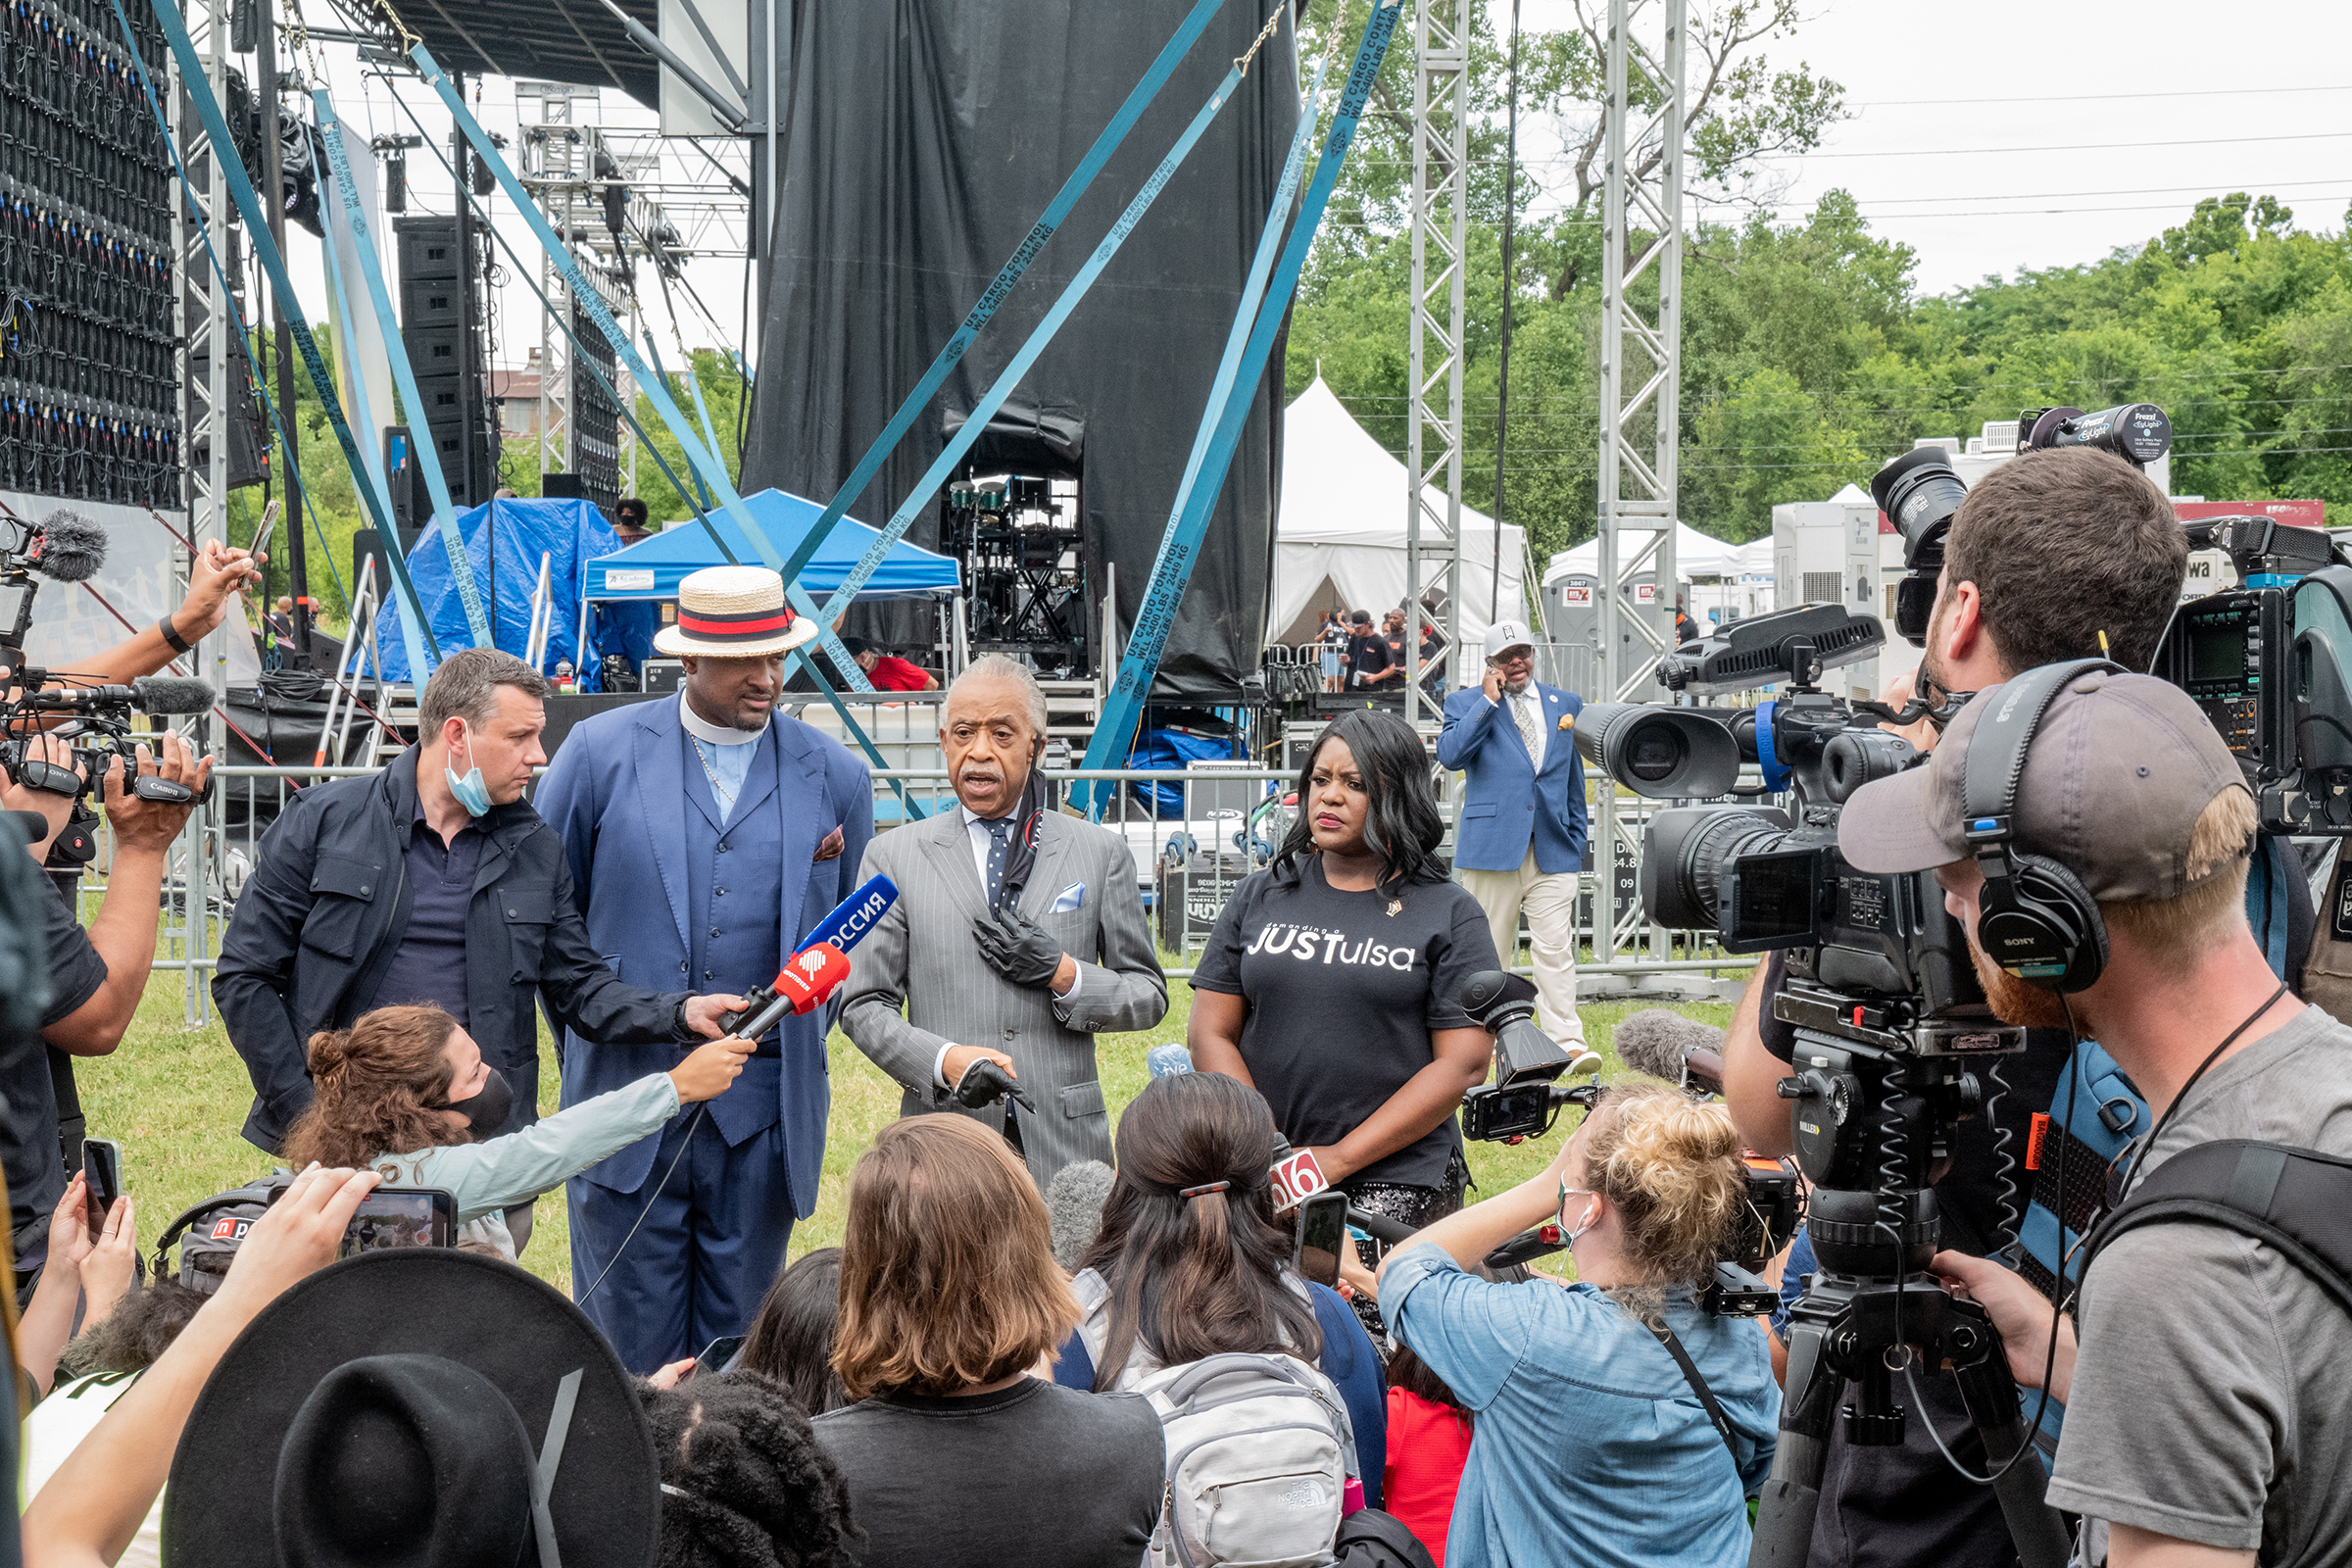 Reverend Al Sharpton speaks to attendees at the Juneteenth celebration in the Greenwood District of Tulsa, Oklahoma on June 19, 2020.